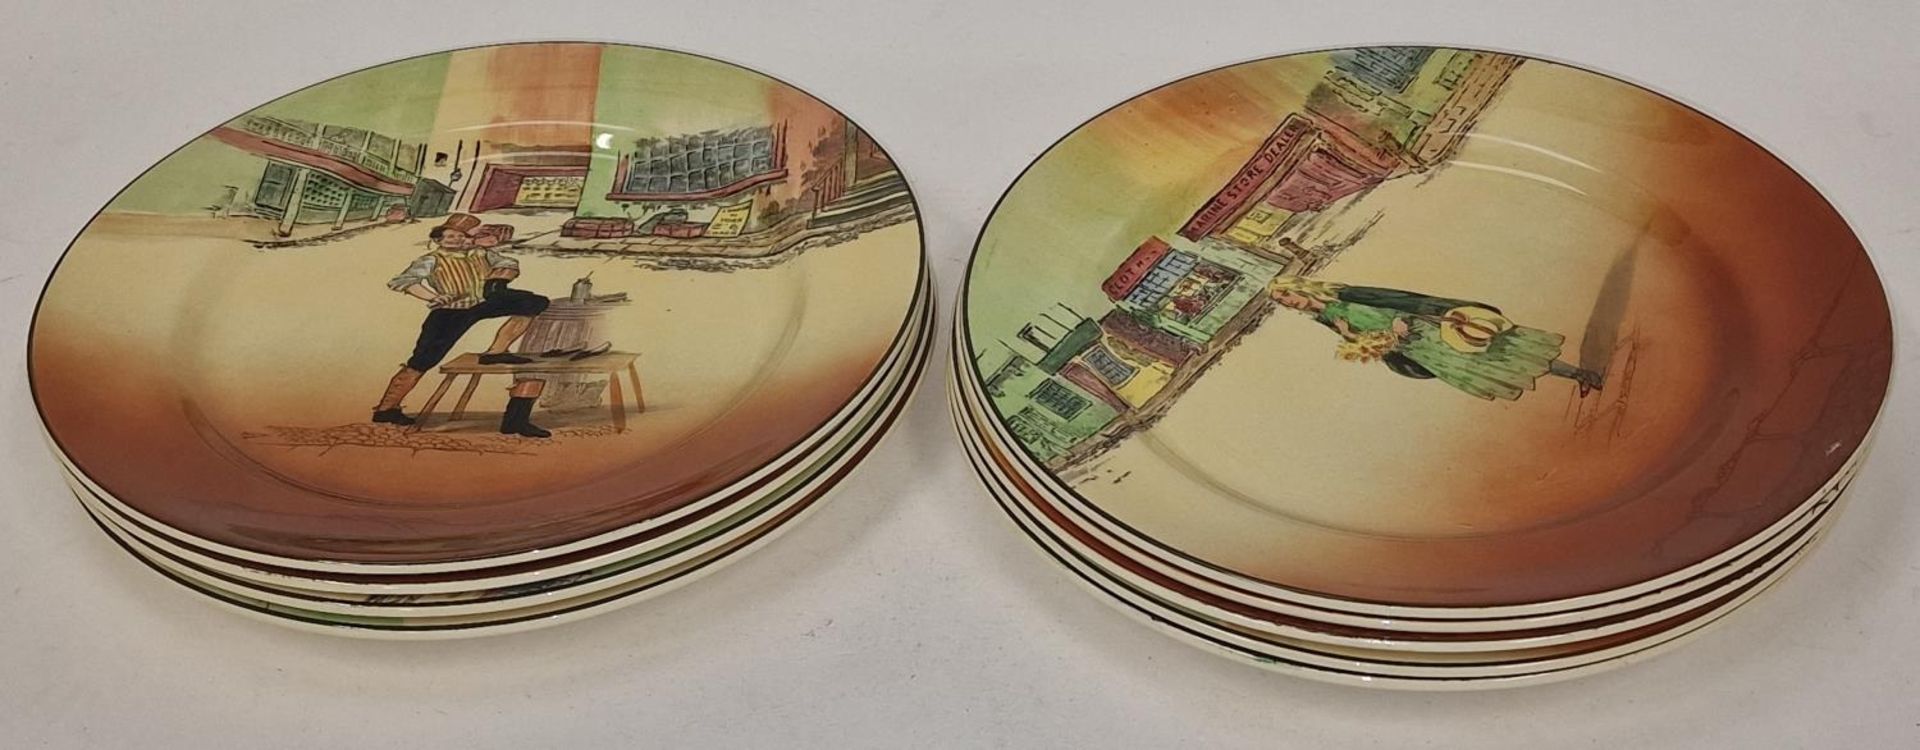 Royal Doulton set of Dickens Ware plates. Total of 9 in lot.